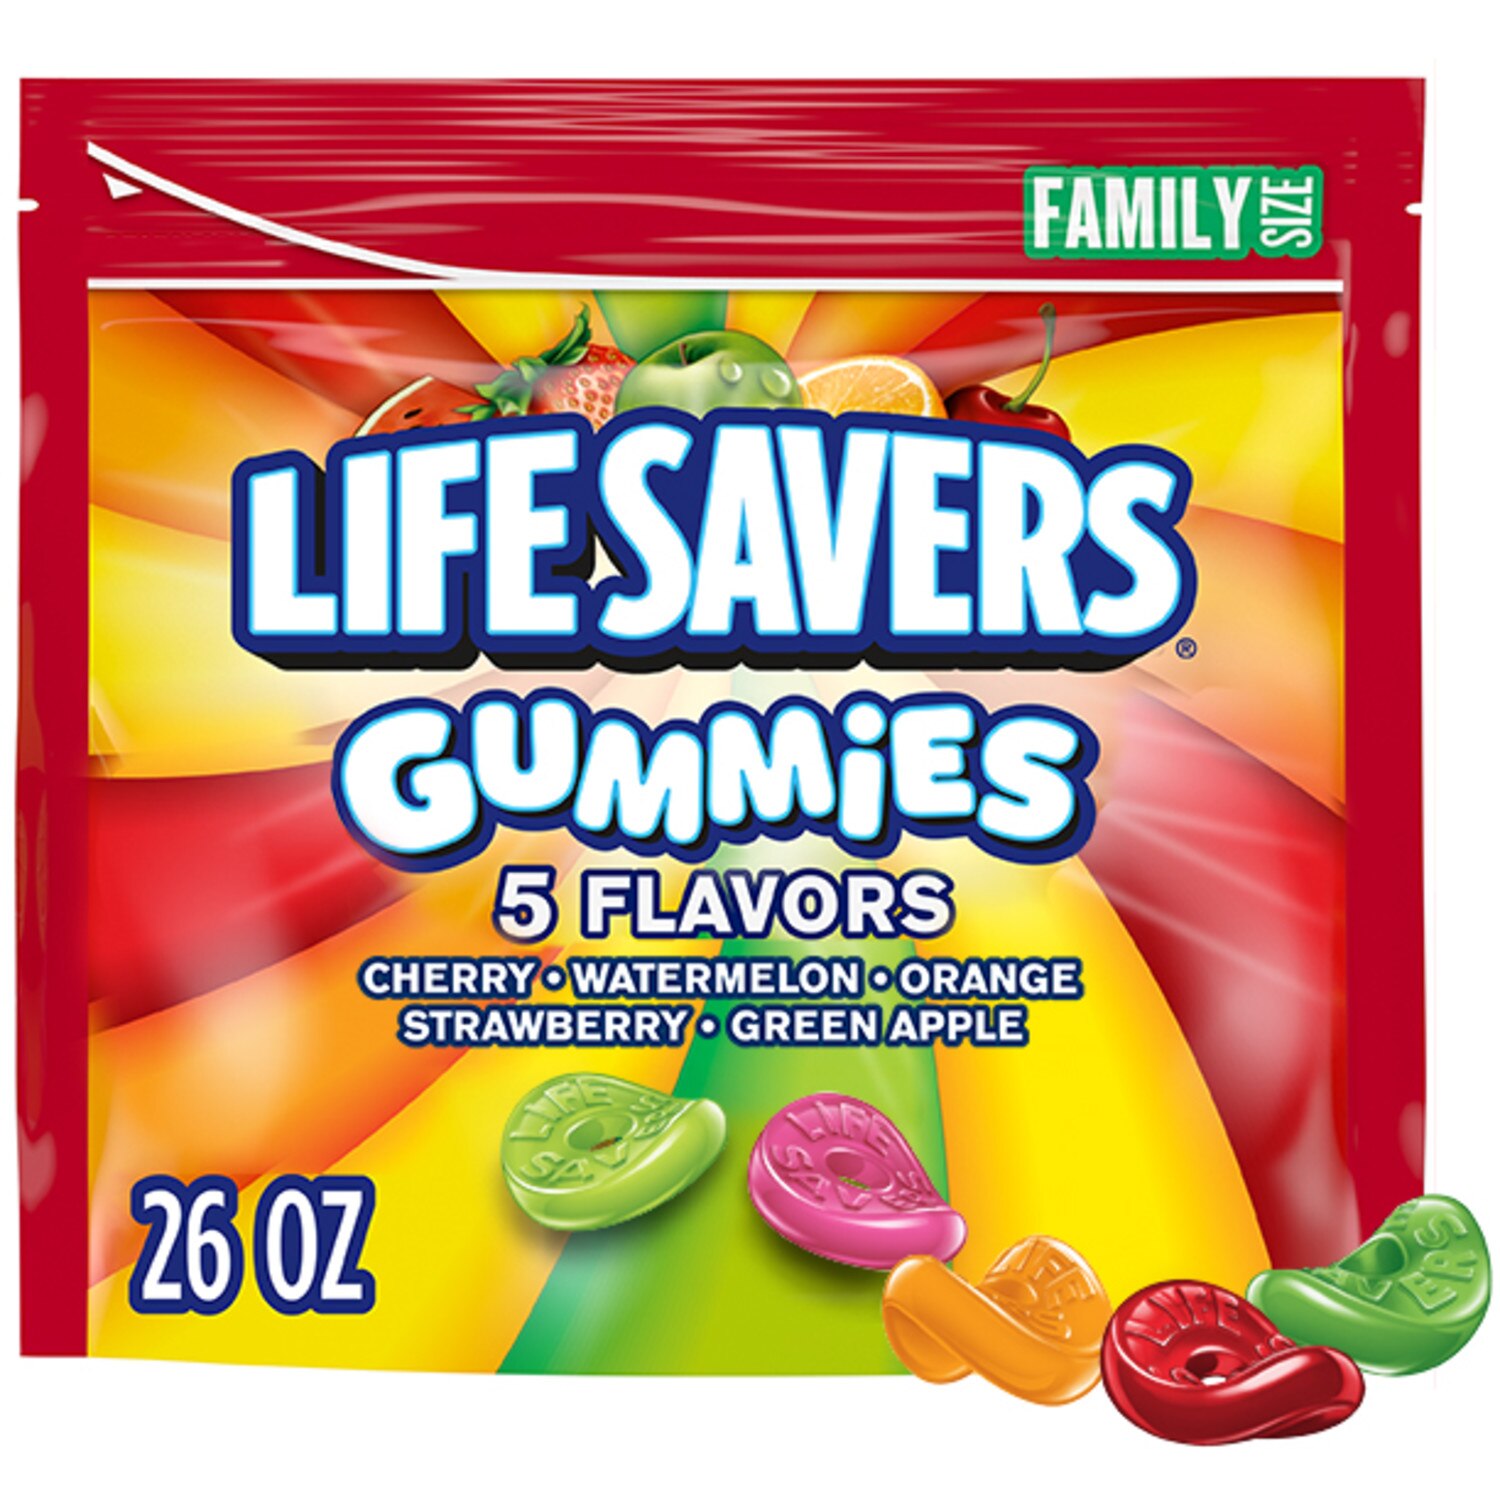 LIFE SAVERS Gummy Candy, 5 Flavors, Family Size, 26 oz Bag